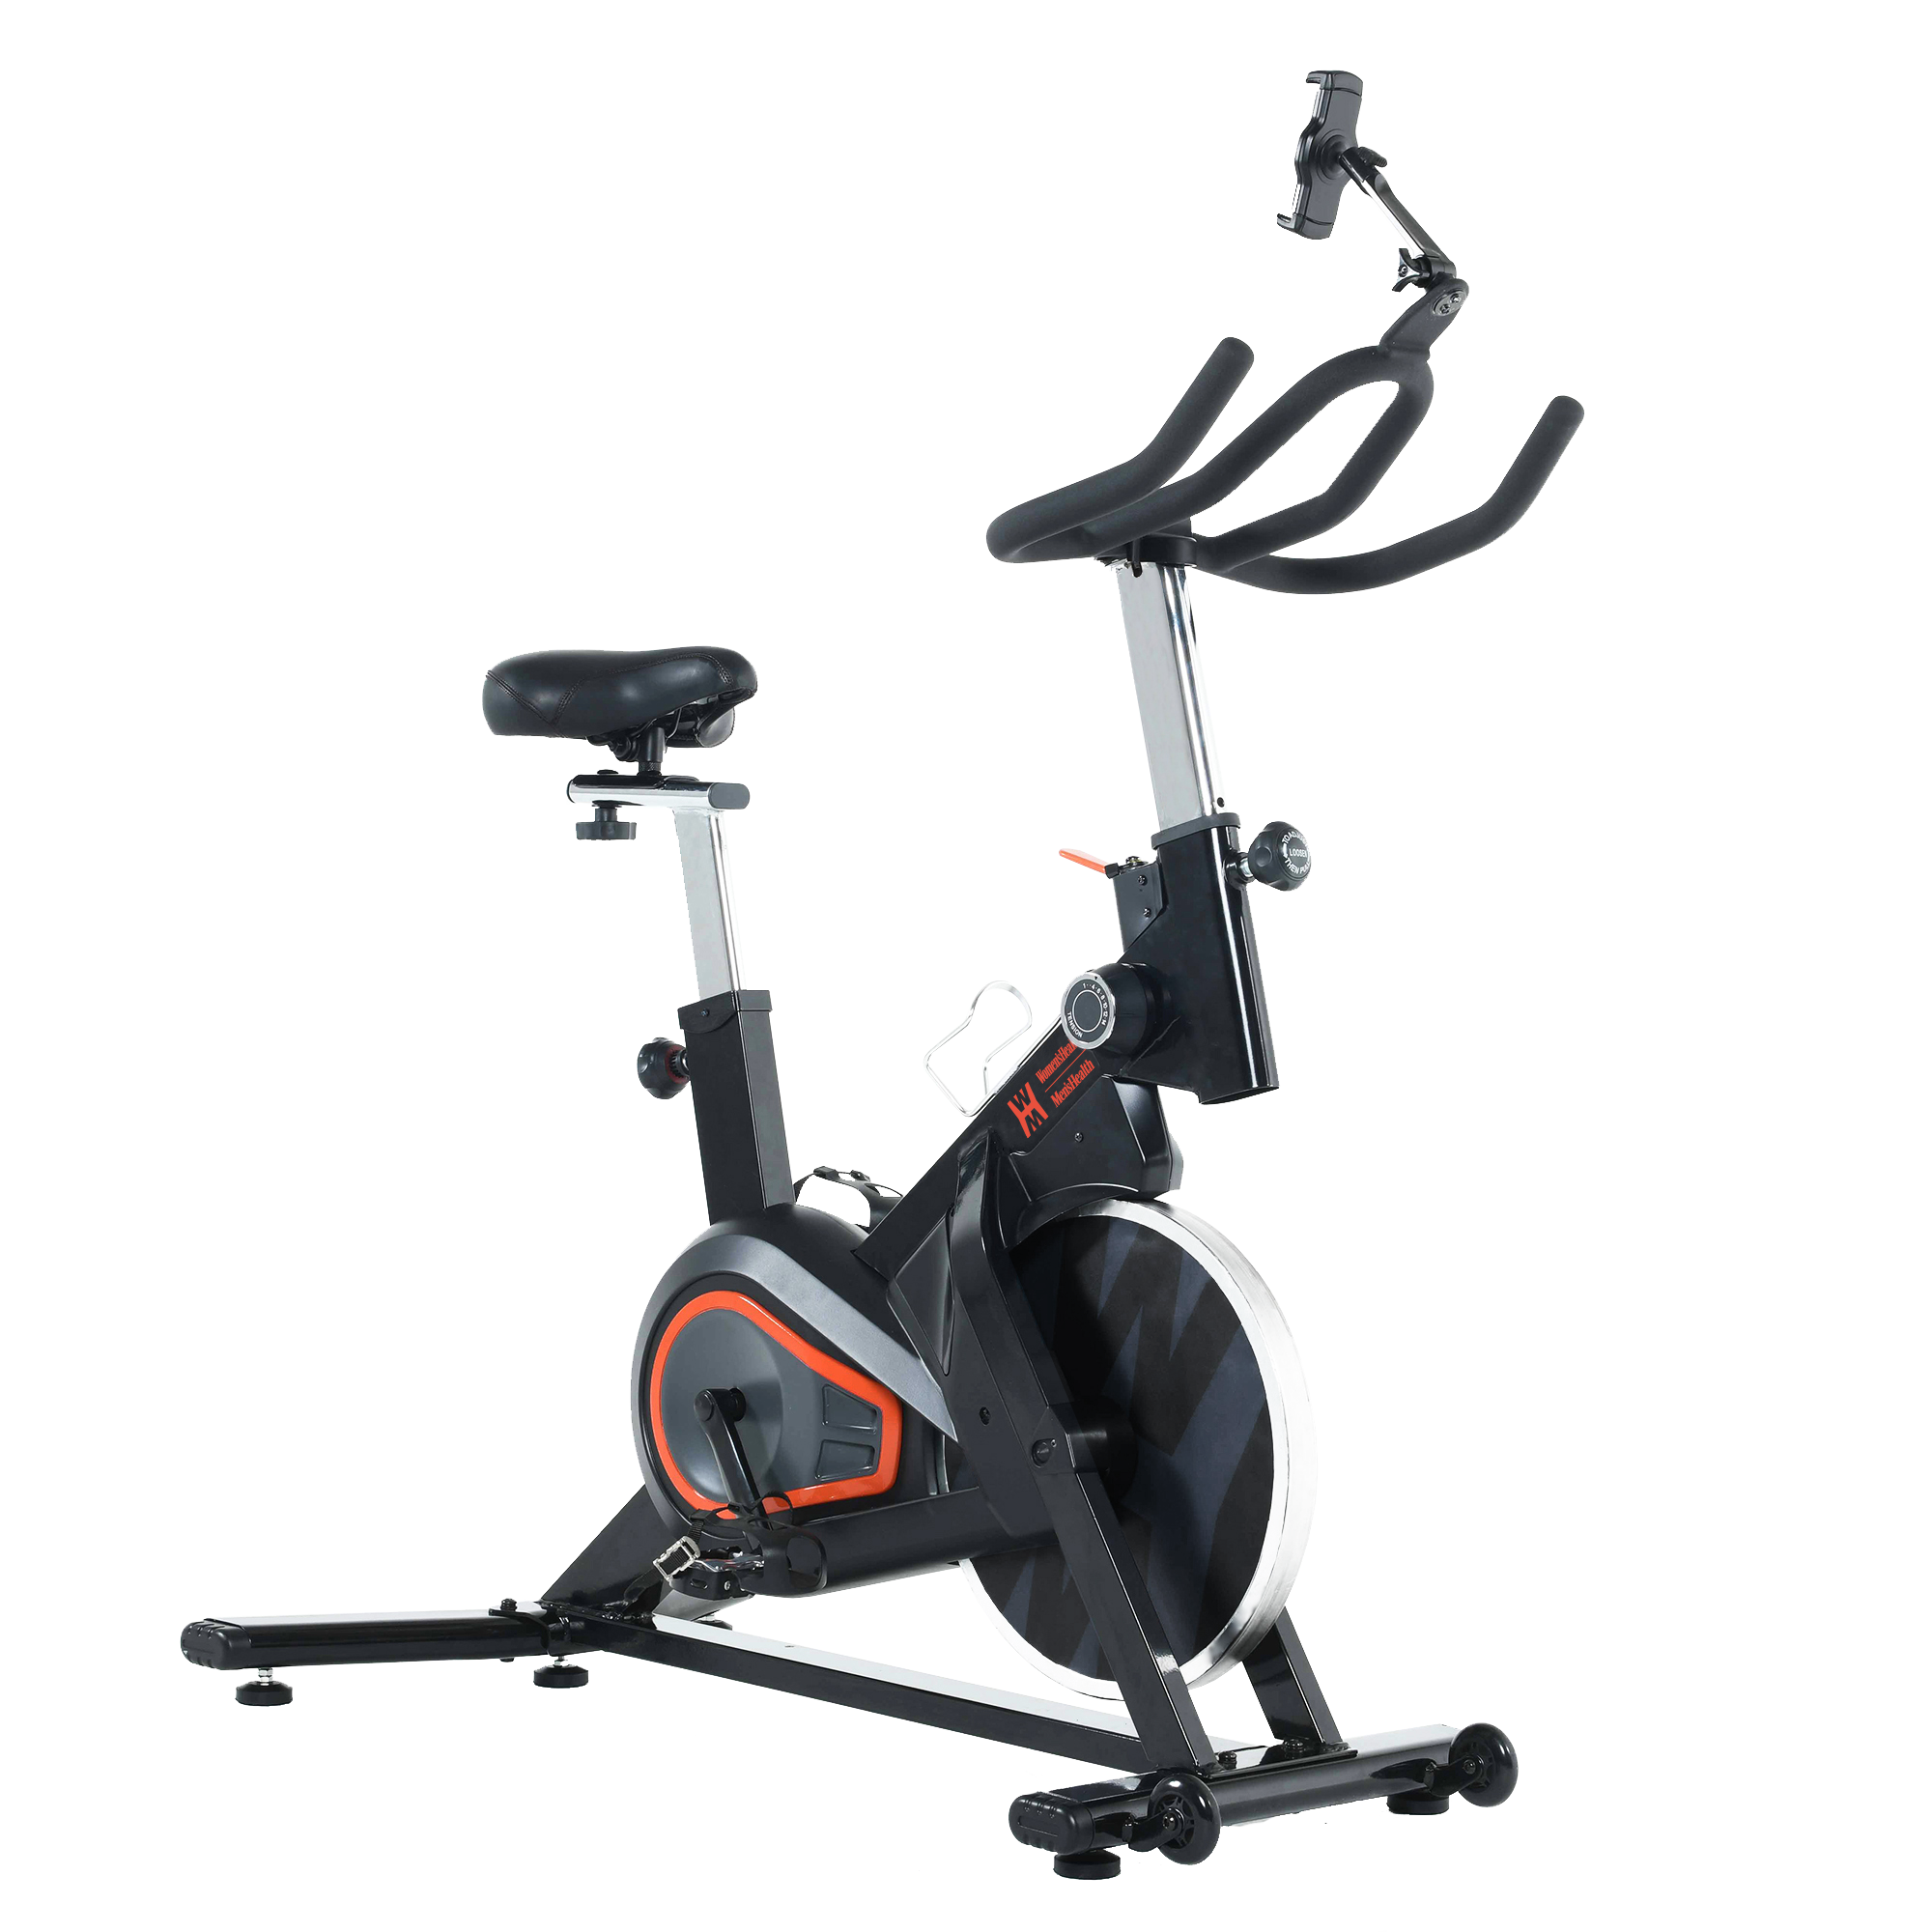 Details about   Indoor Sport Bike Stationary Pro Exercise Cycling Bike Home Cardio Gym Workout 